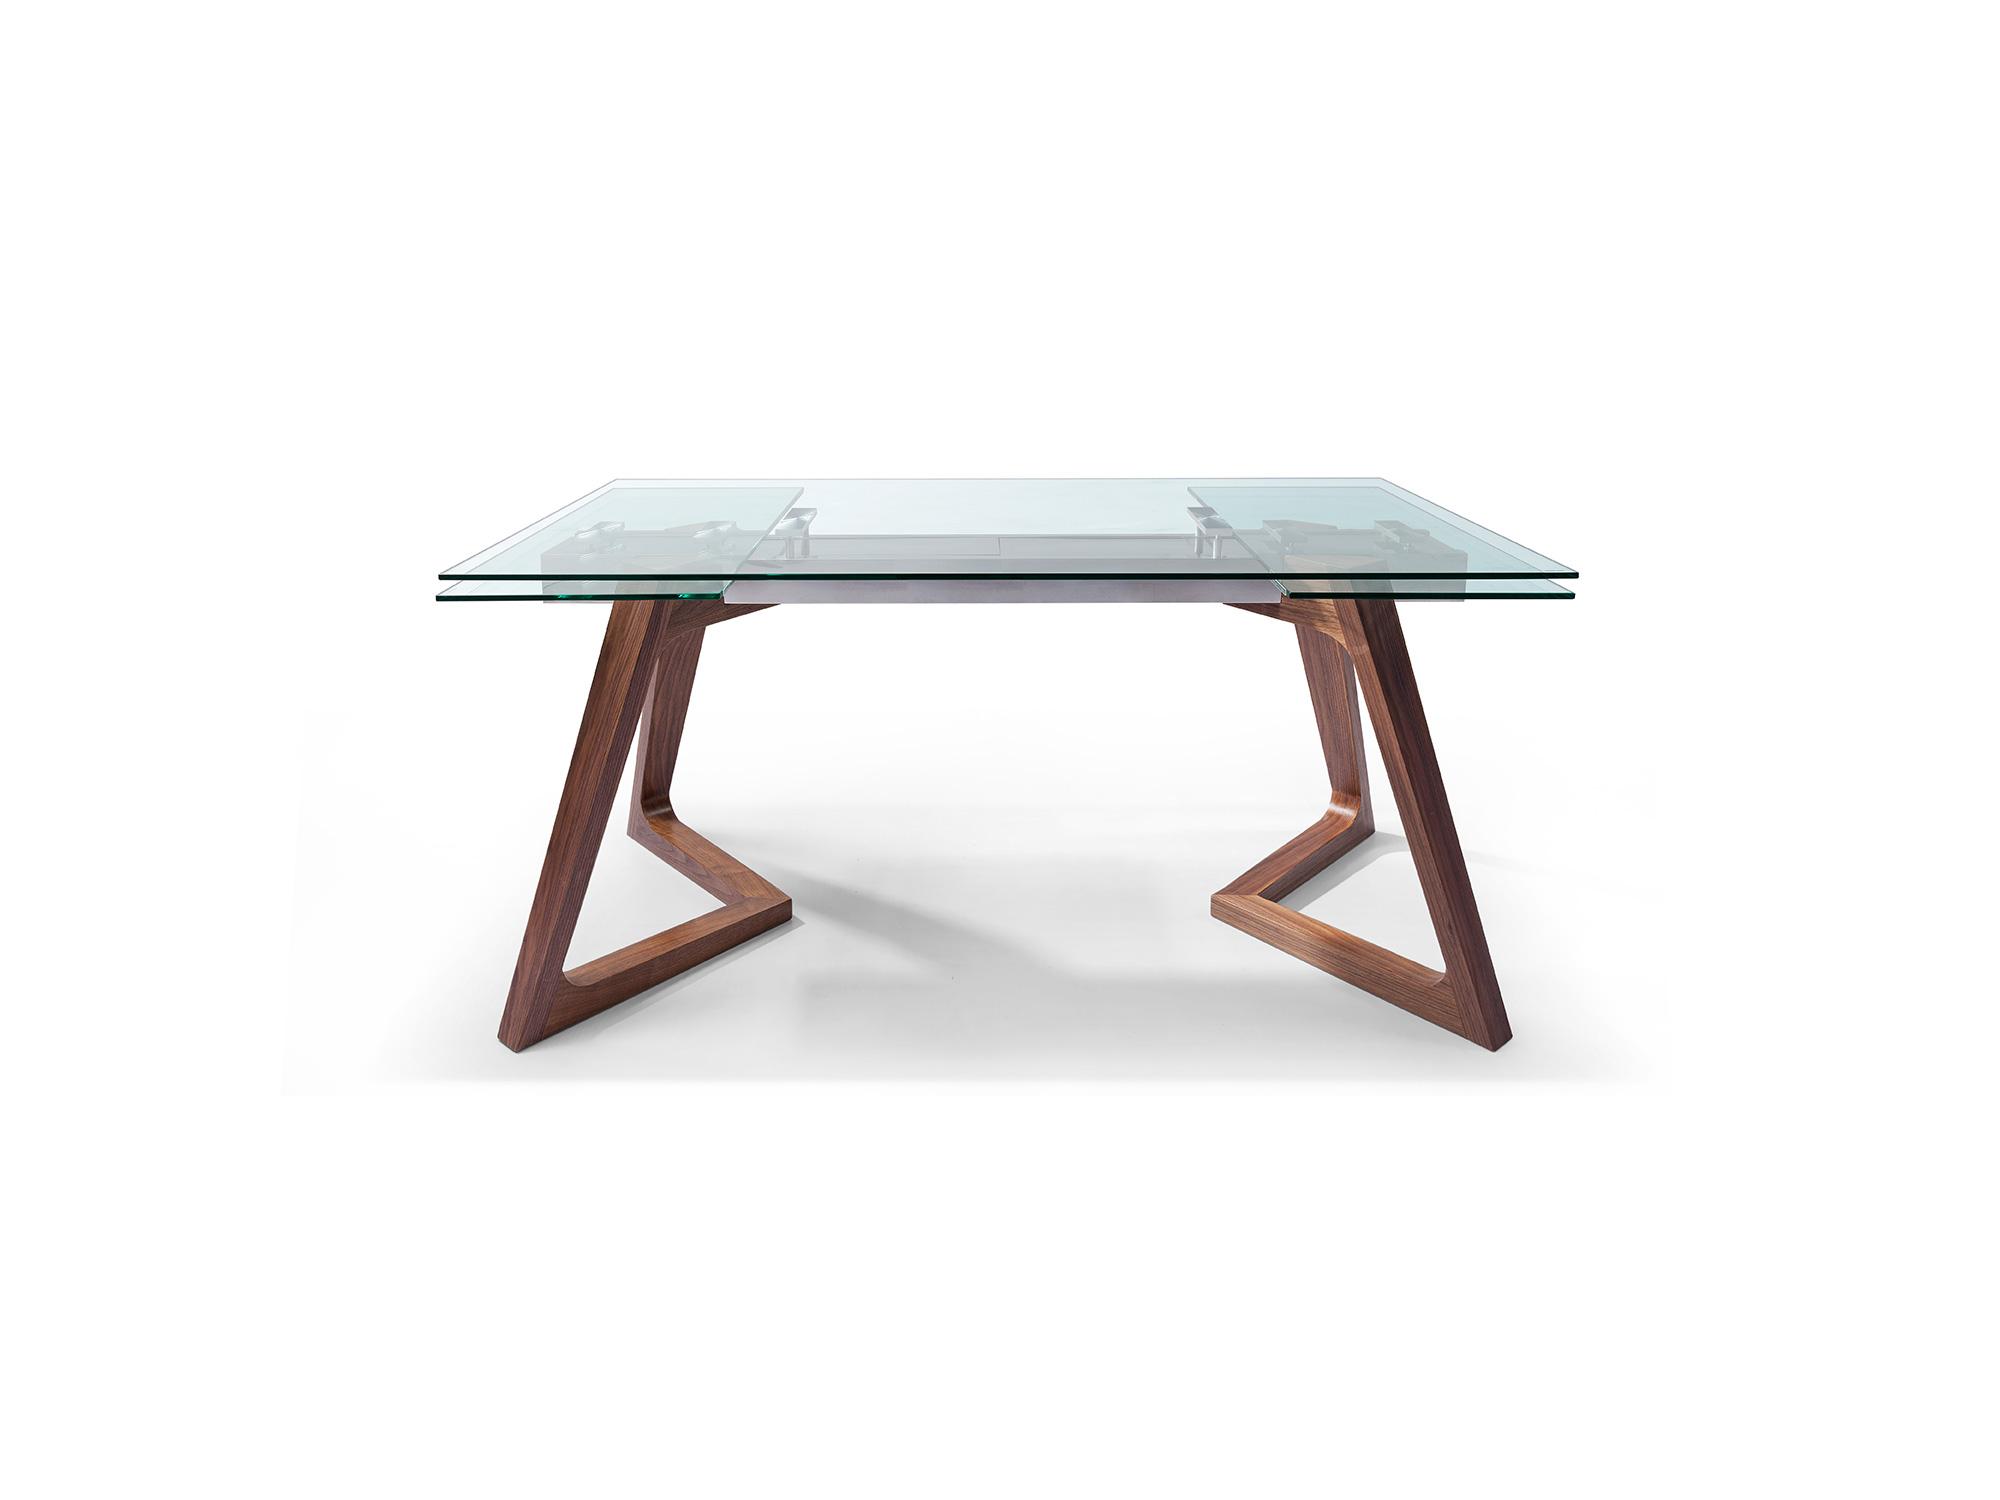 Modern Dining Table DT1276-WLT Delta DT1276-WLT in Walnut 